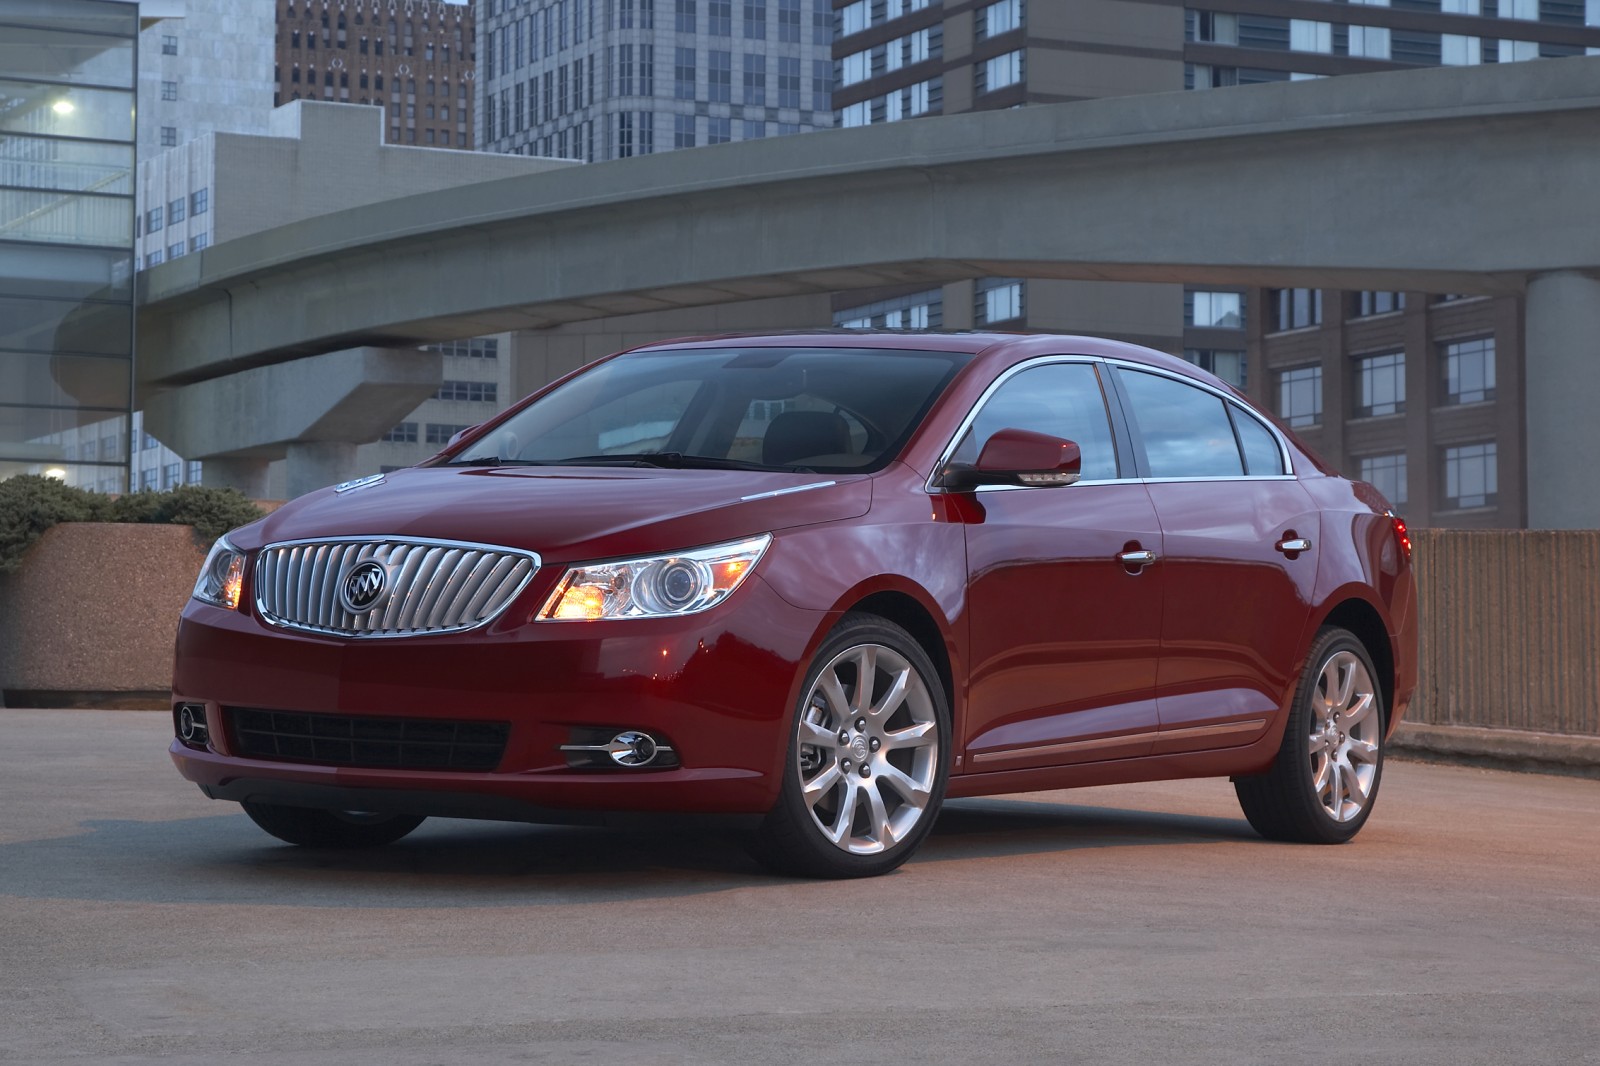 New Car Review: 2013 Buick LaCrosse